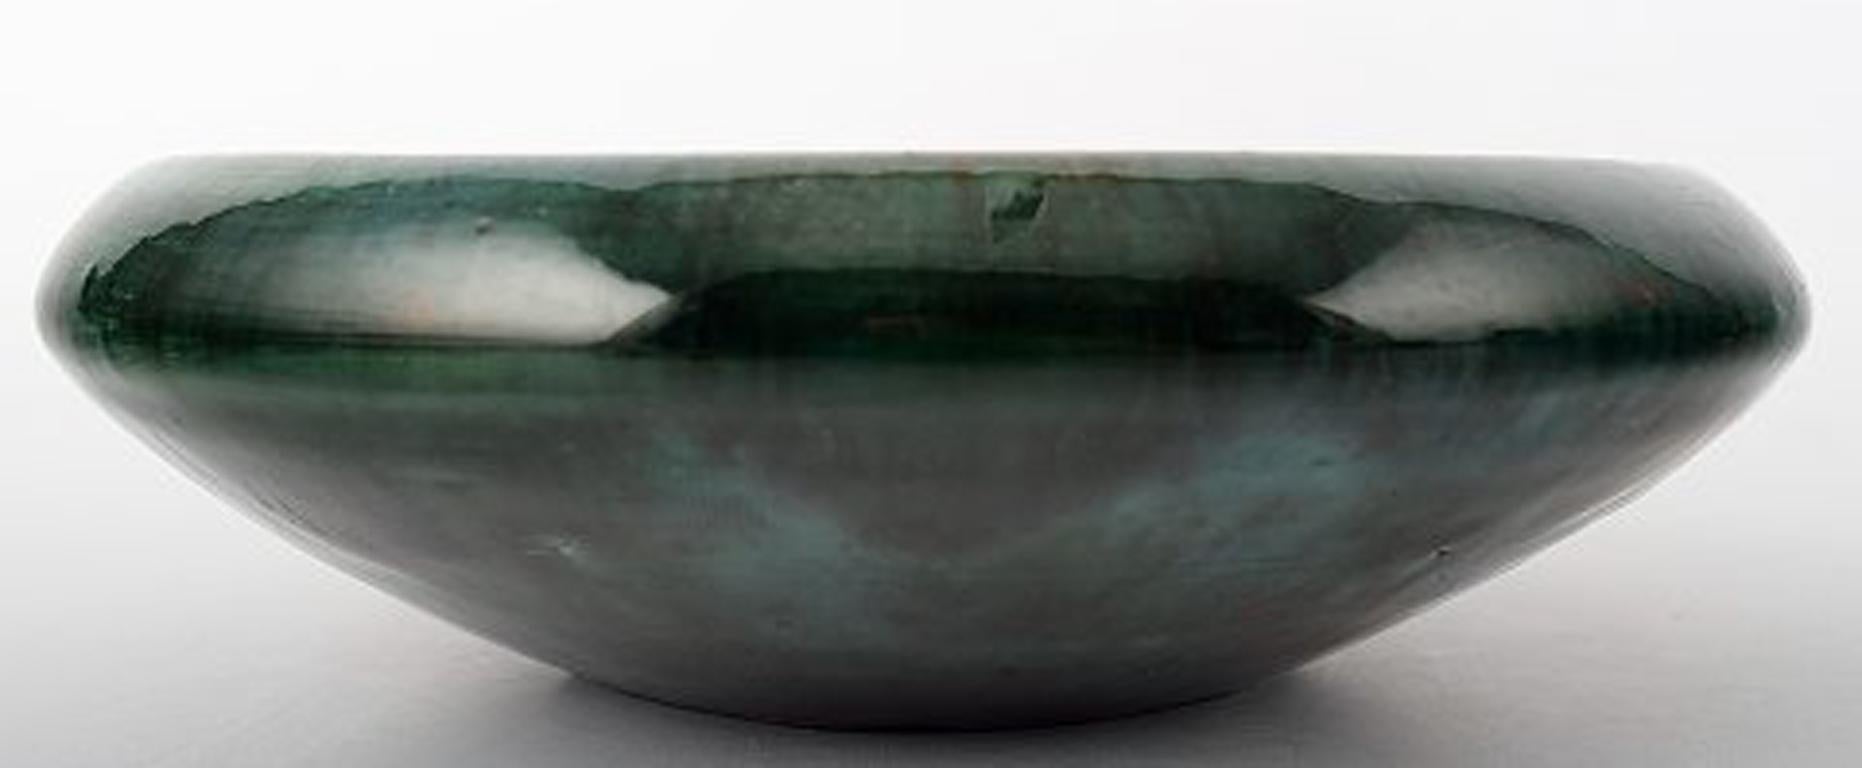 Large and impressive Danish private collection (Total of 42 vases, bowls, figurines, etc.) 
Soren Kongstrand 1872-1951) and 
Jens Petersen (1890-1956) 
Dish, Soren Kongstrand, unsigned. 
Measuring 17 x 5 cm. 
In perfect condition. 
The